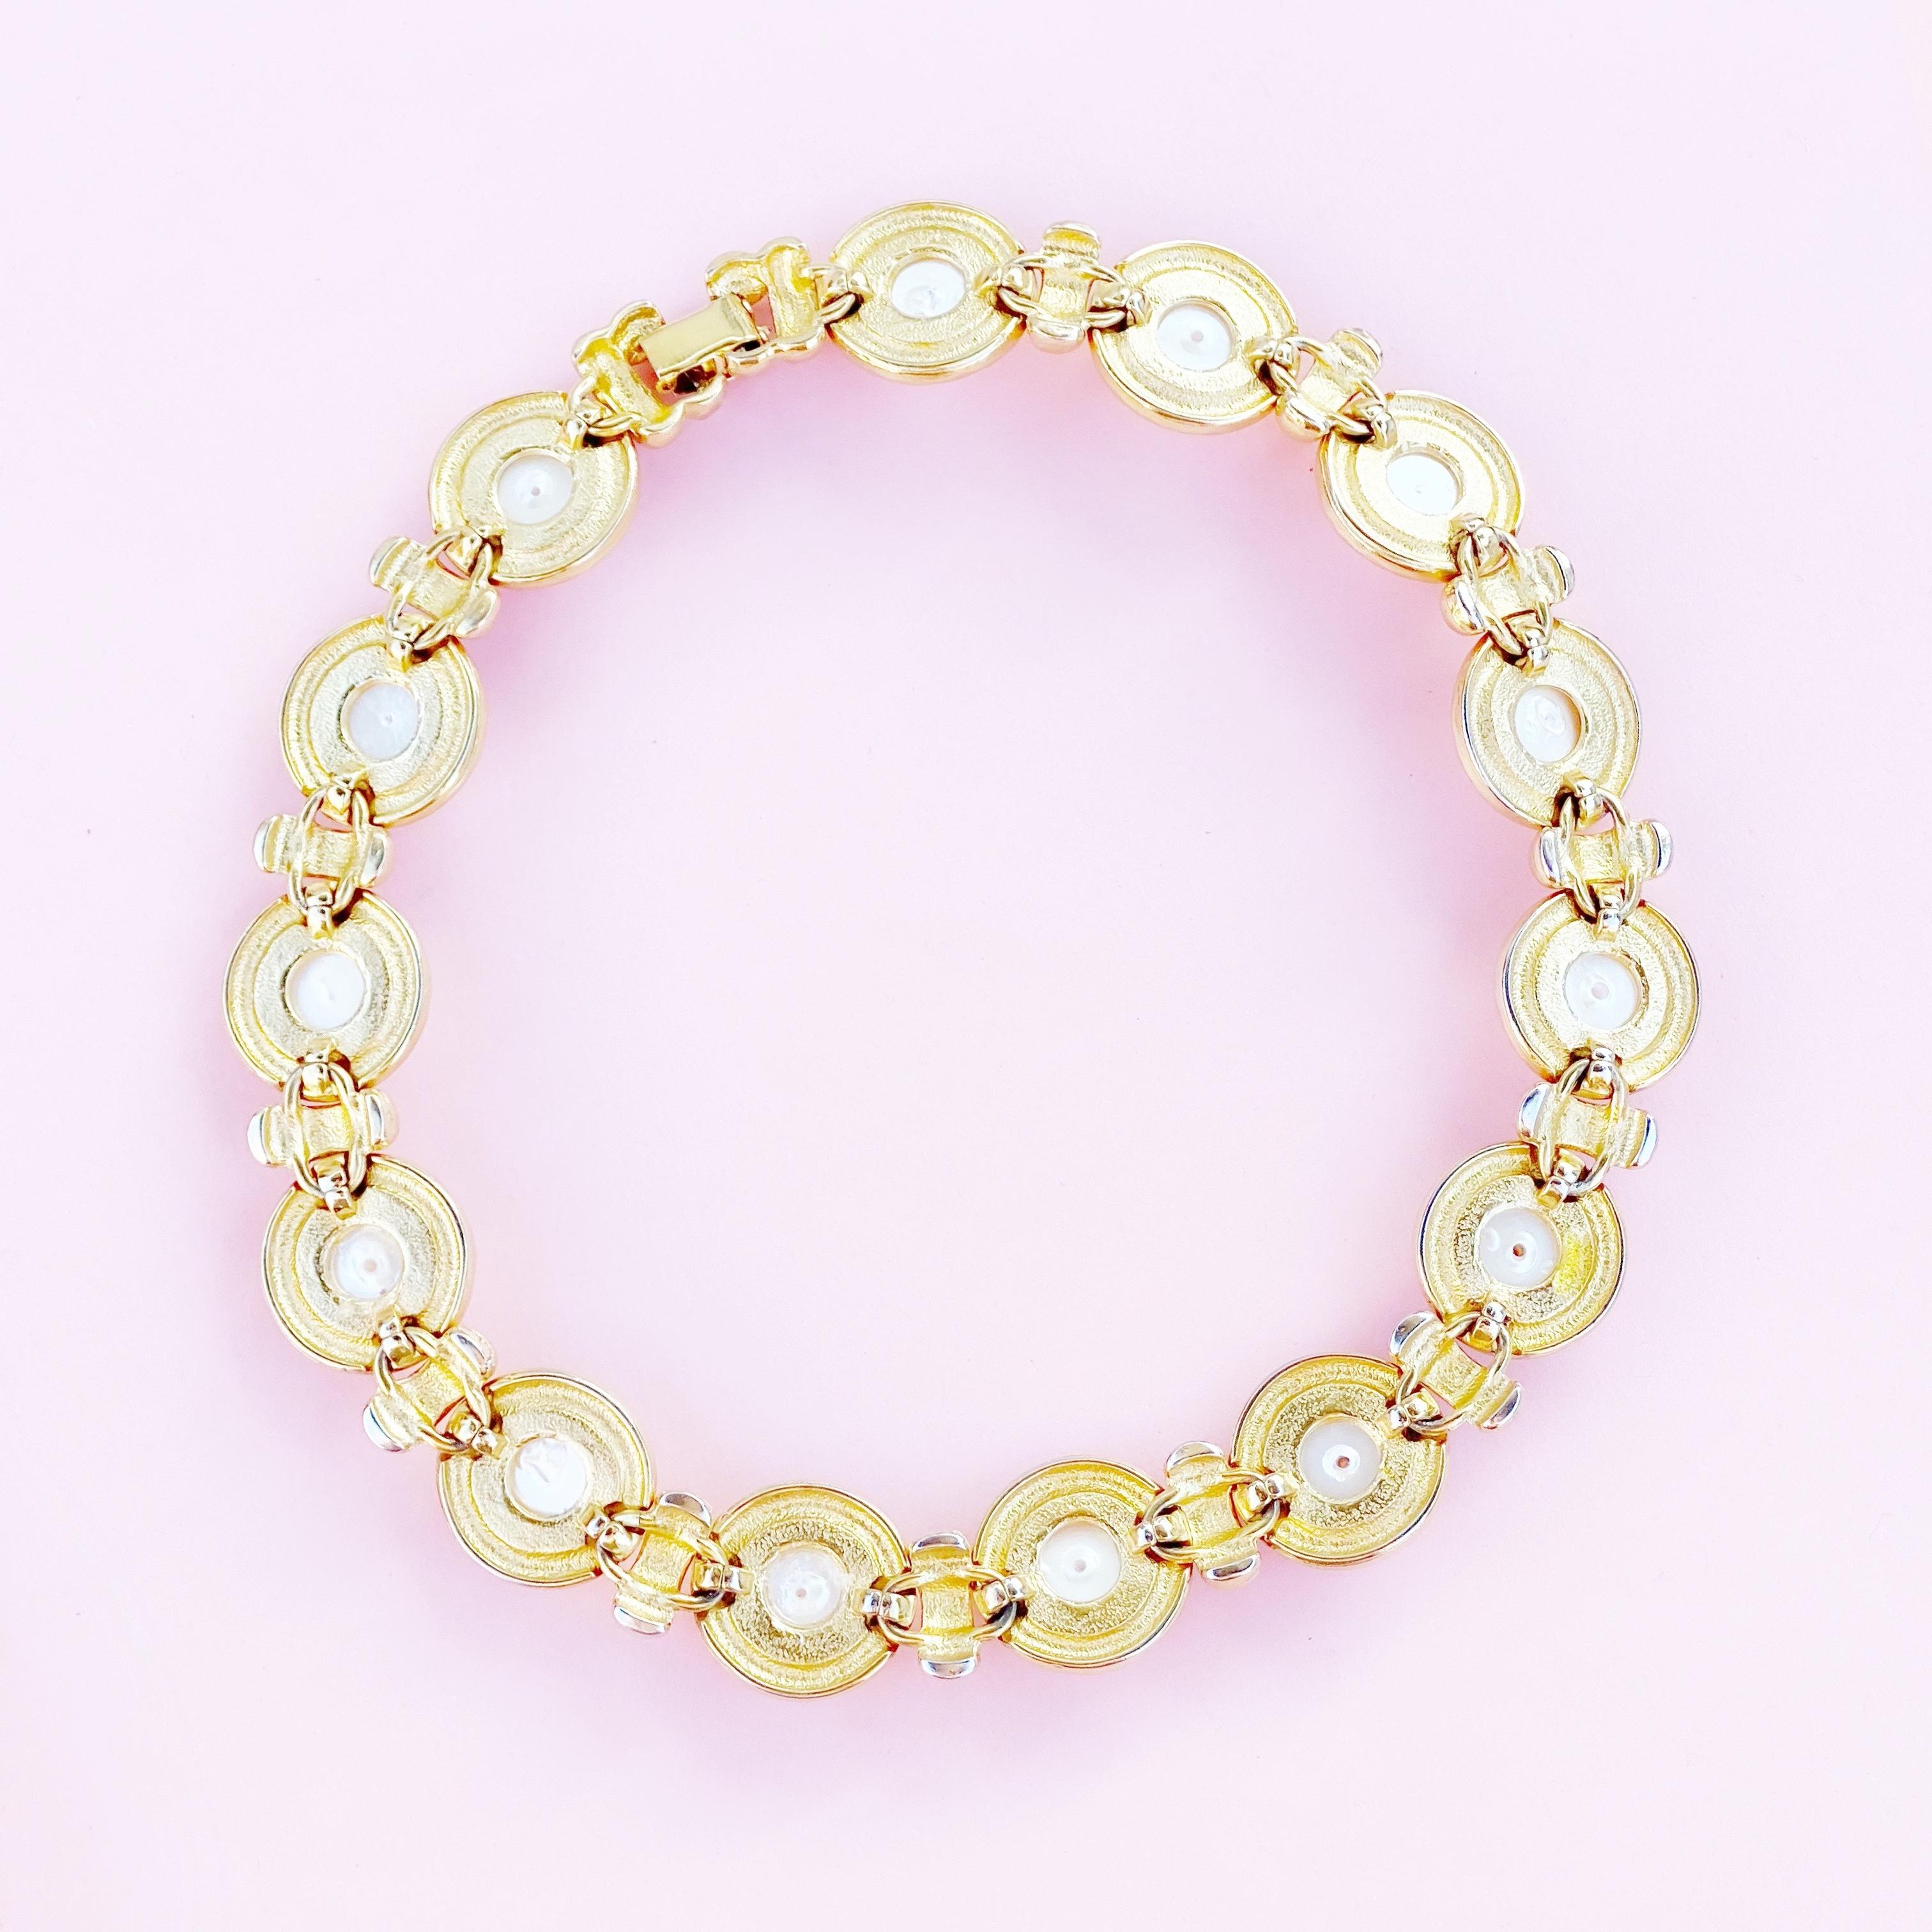 Women's Vintage Chunky Gilt & Faux Pearl Cabochon Link Choker Necklace, 1980s